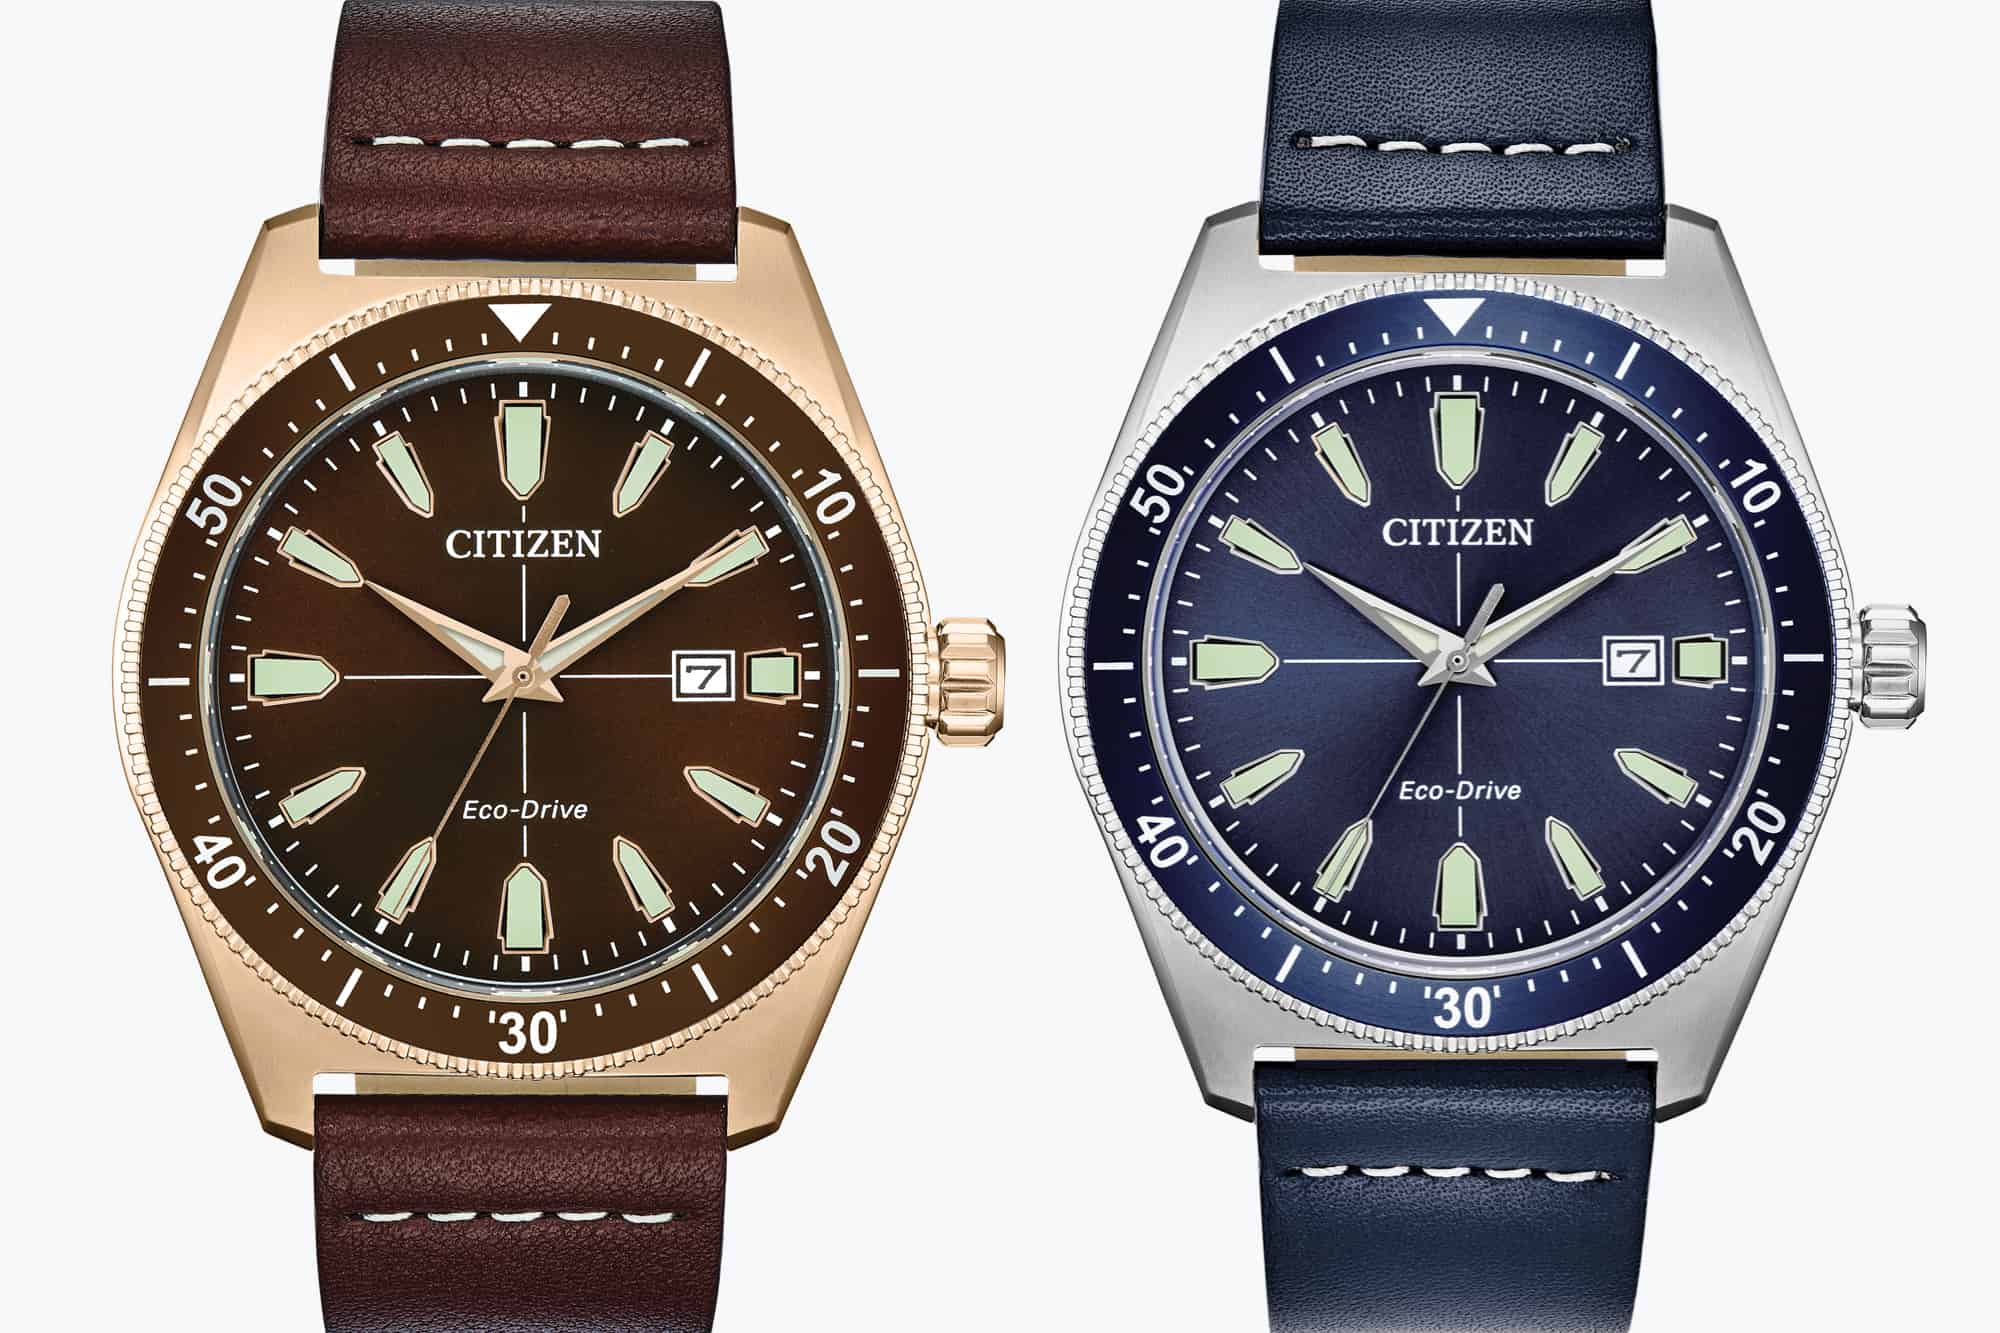 Introducing Three Citizen Eco-Drive Brycen Divers